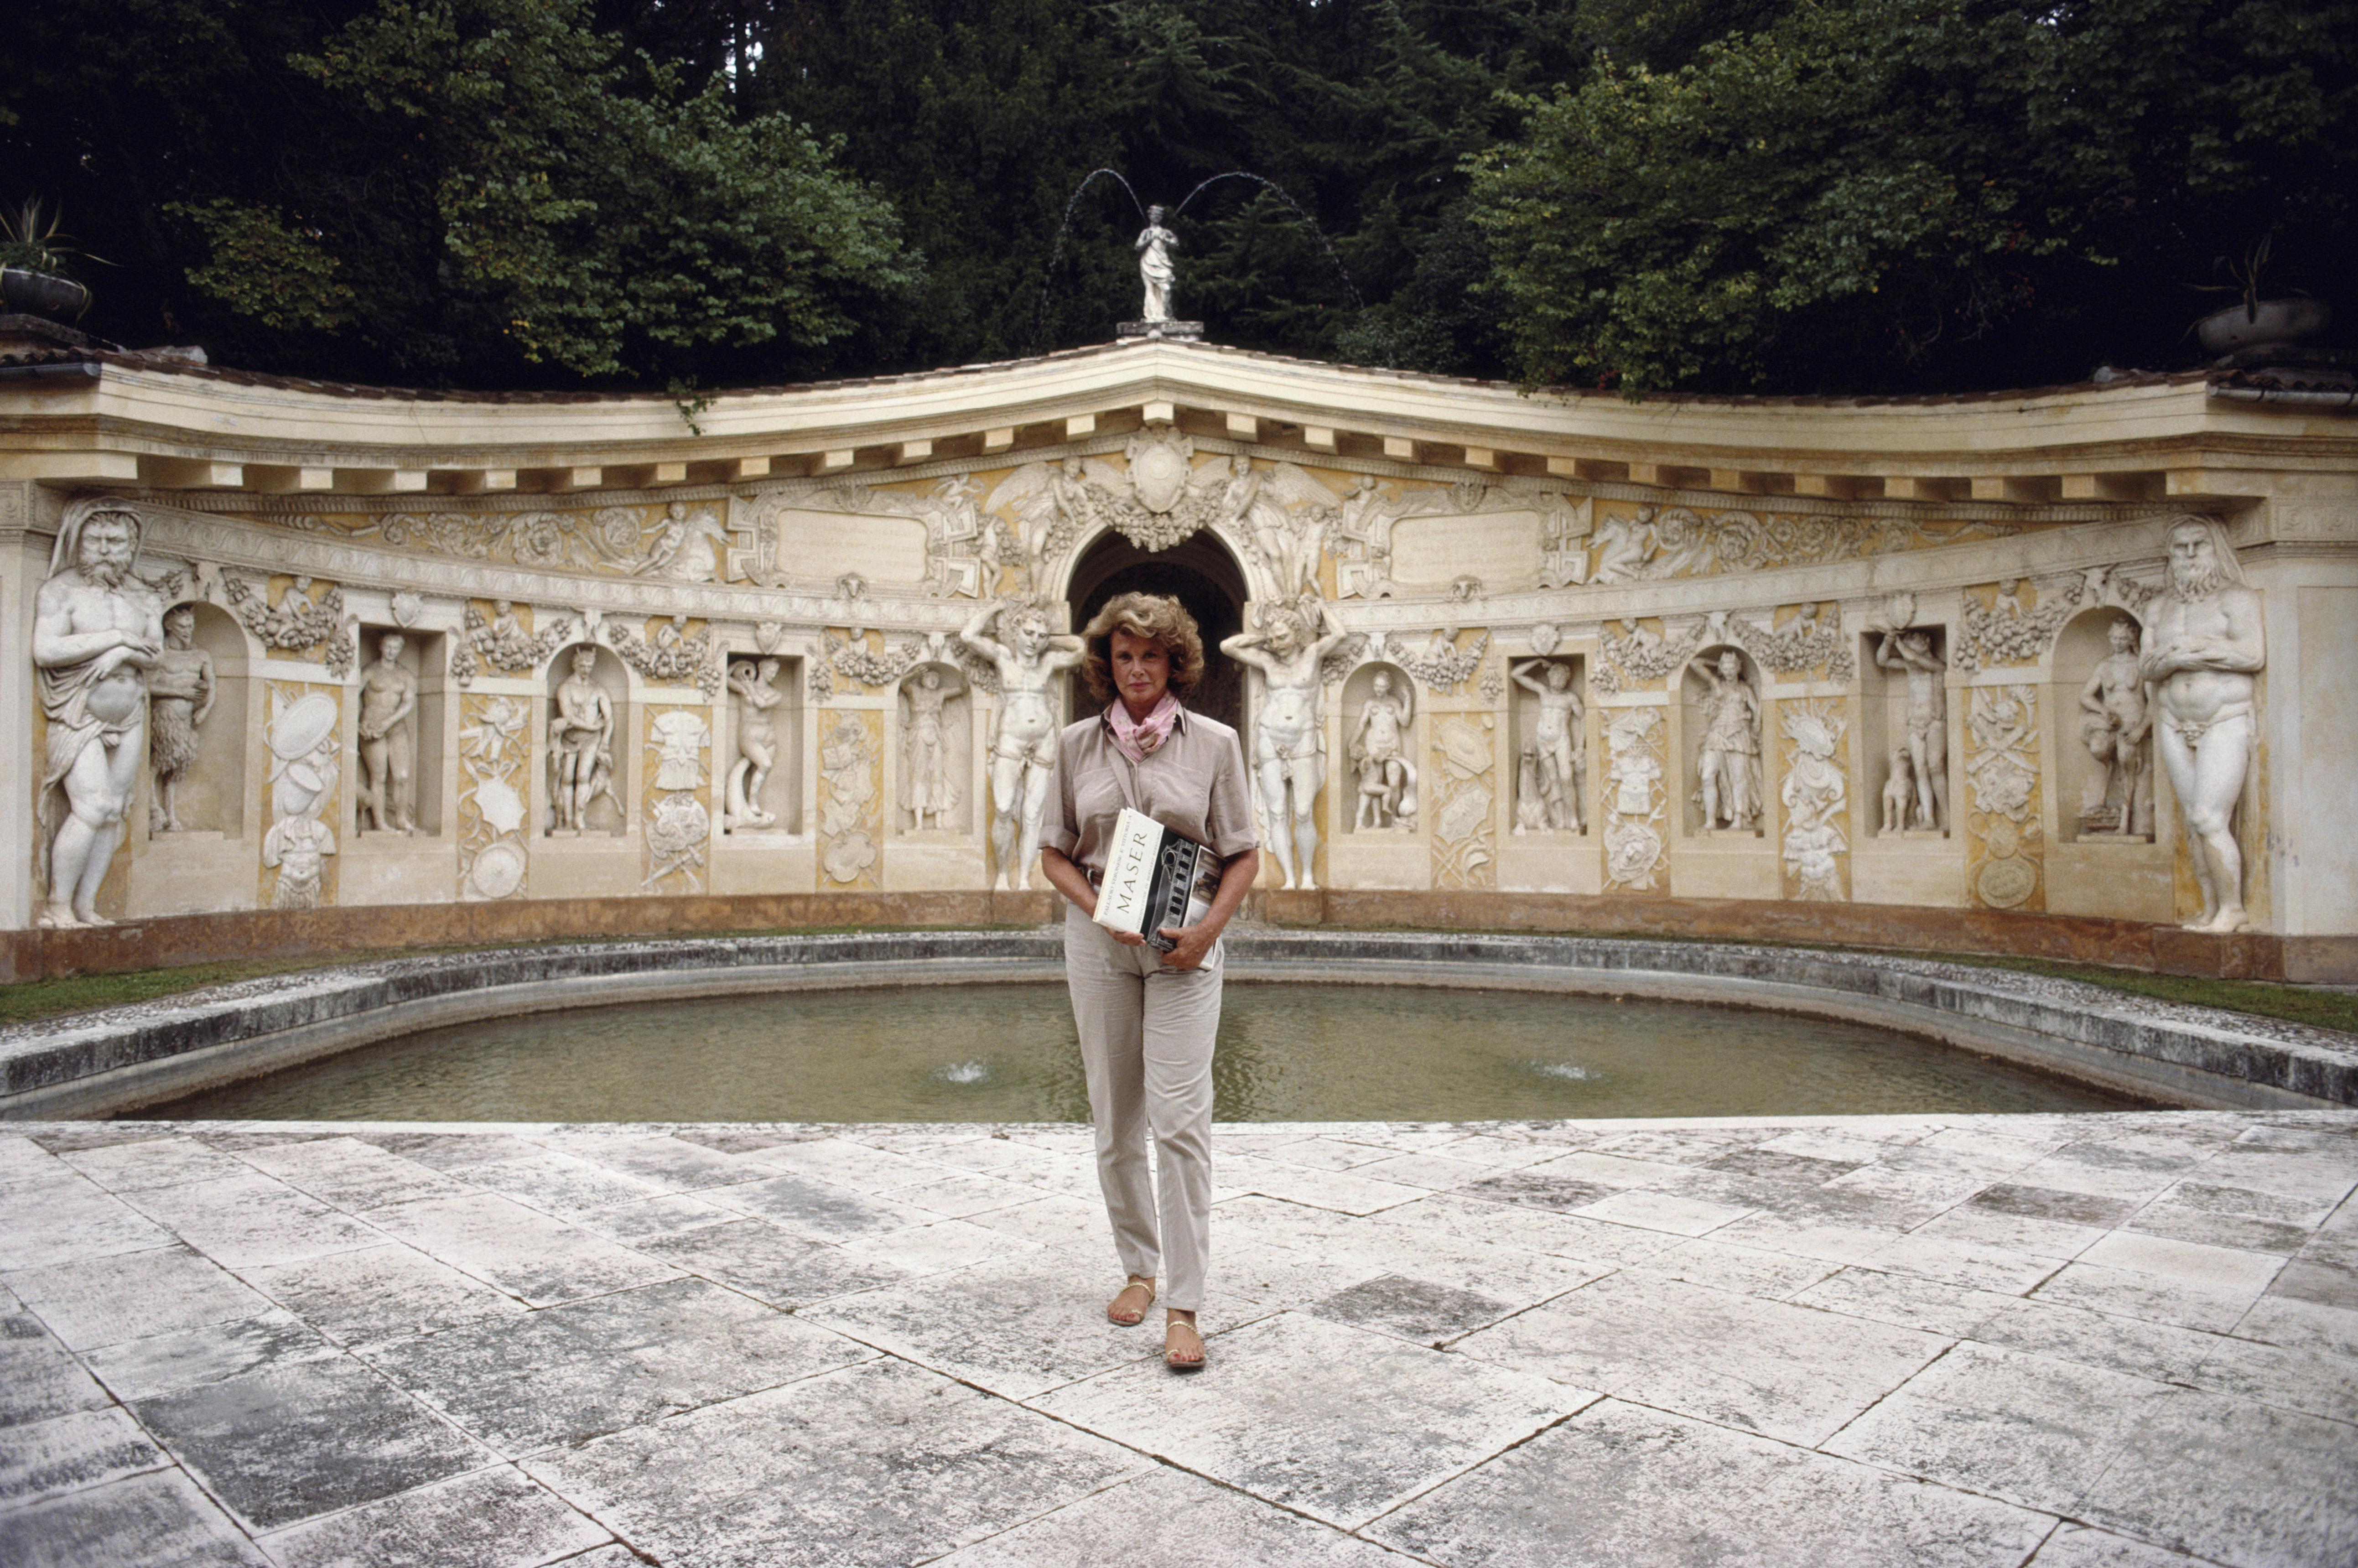 Slim Aarons
Laguna Beach Surfers
1970
C print
Estate stamped and hand numbered edition of 150 with certificate of authenticity from the estate.   

Principessa Doris Pignatelli poses at the Villa Barbaro, at Maser, near Asolo, Italy, in September